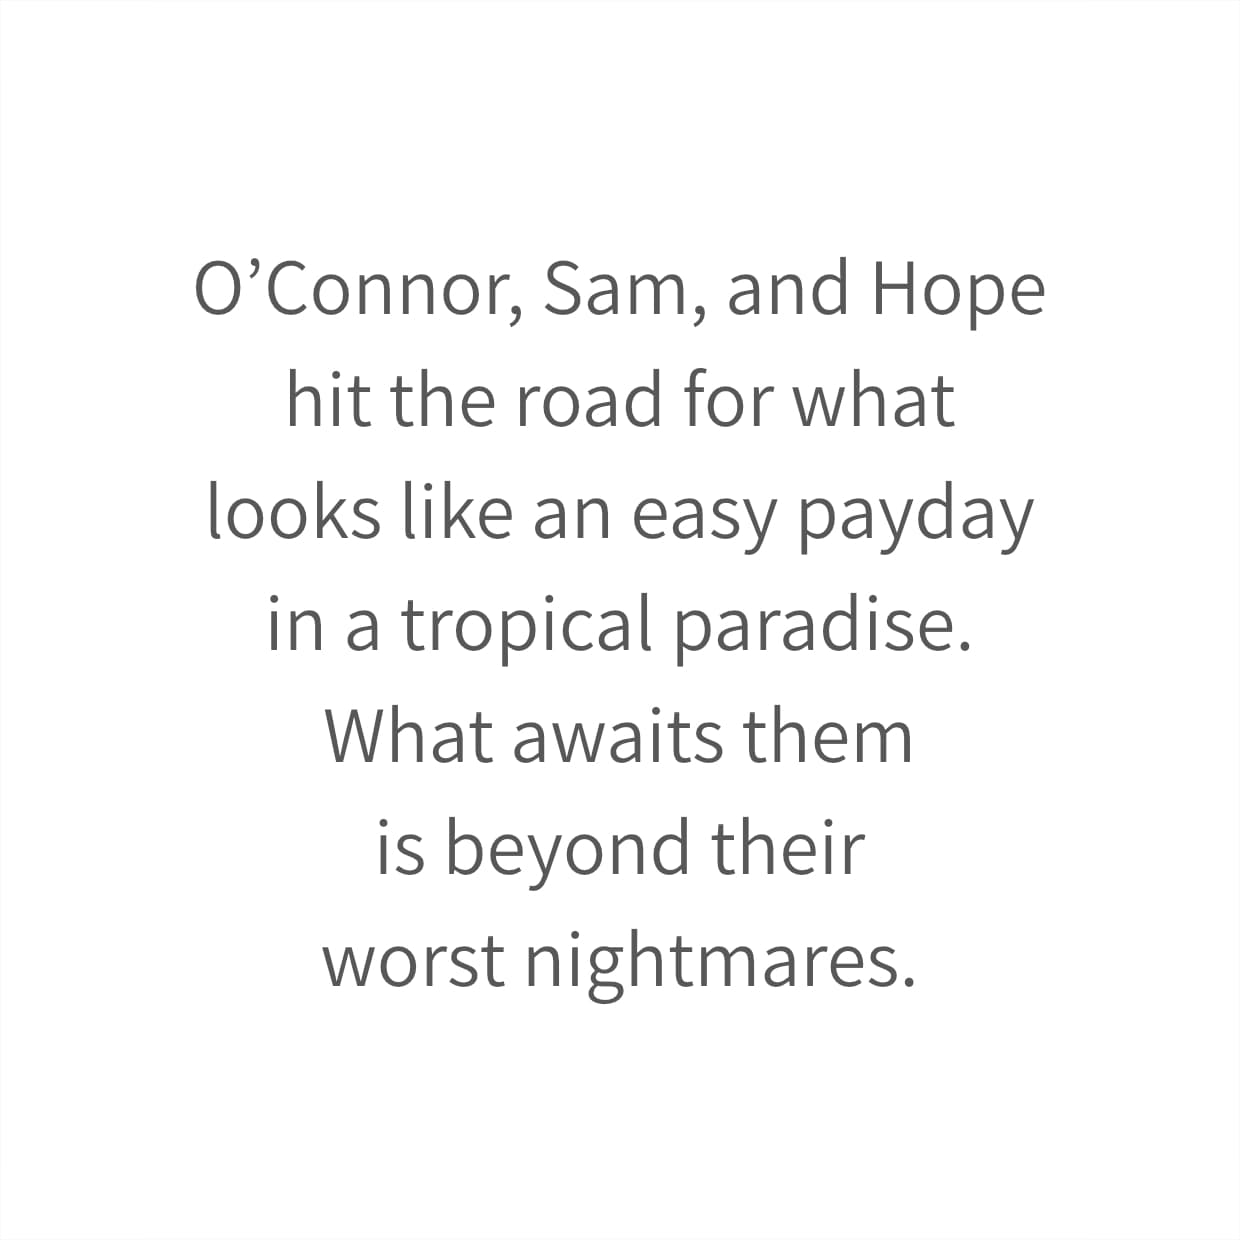 O’Connor, Sam, and Hope hit the road for what looks like an easy payday in a tropical paradise. What awaits them is beyond their worst nightmares.